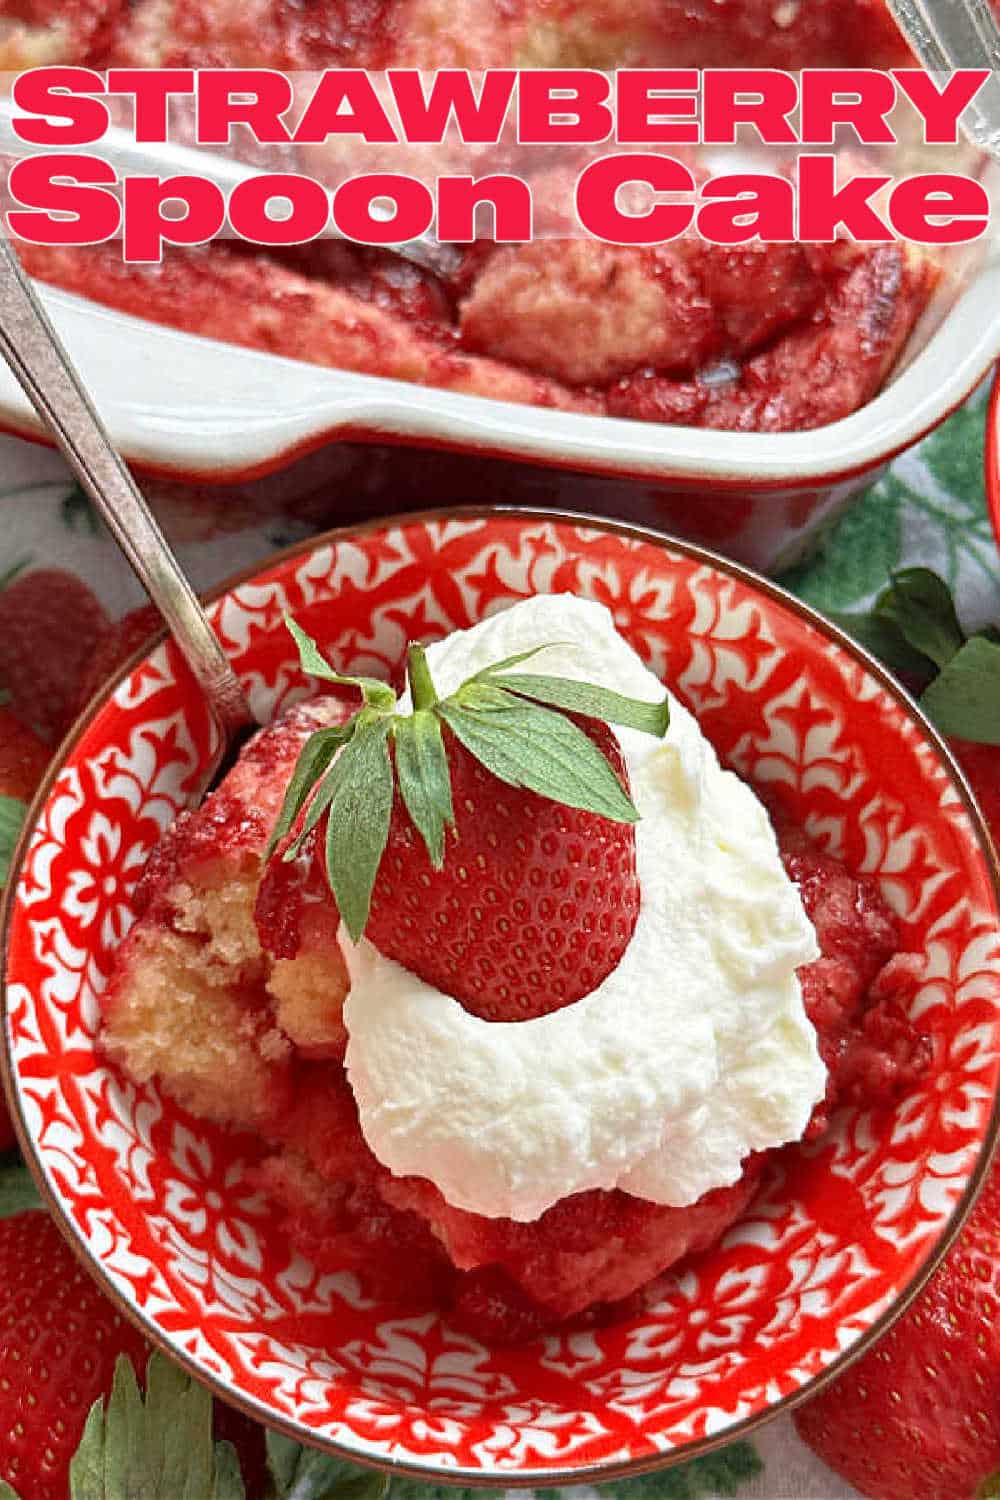 Pinterest Pin for strawberry spoon cake recipe